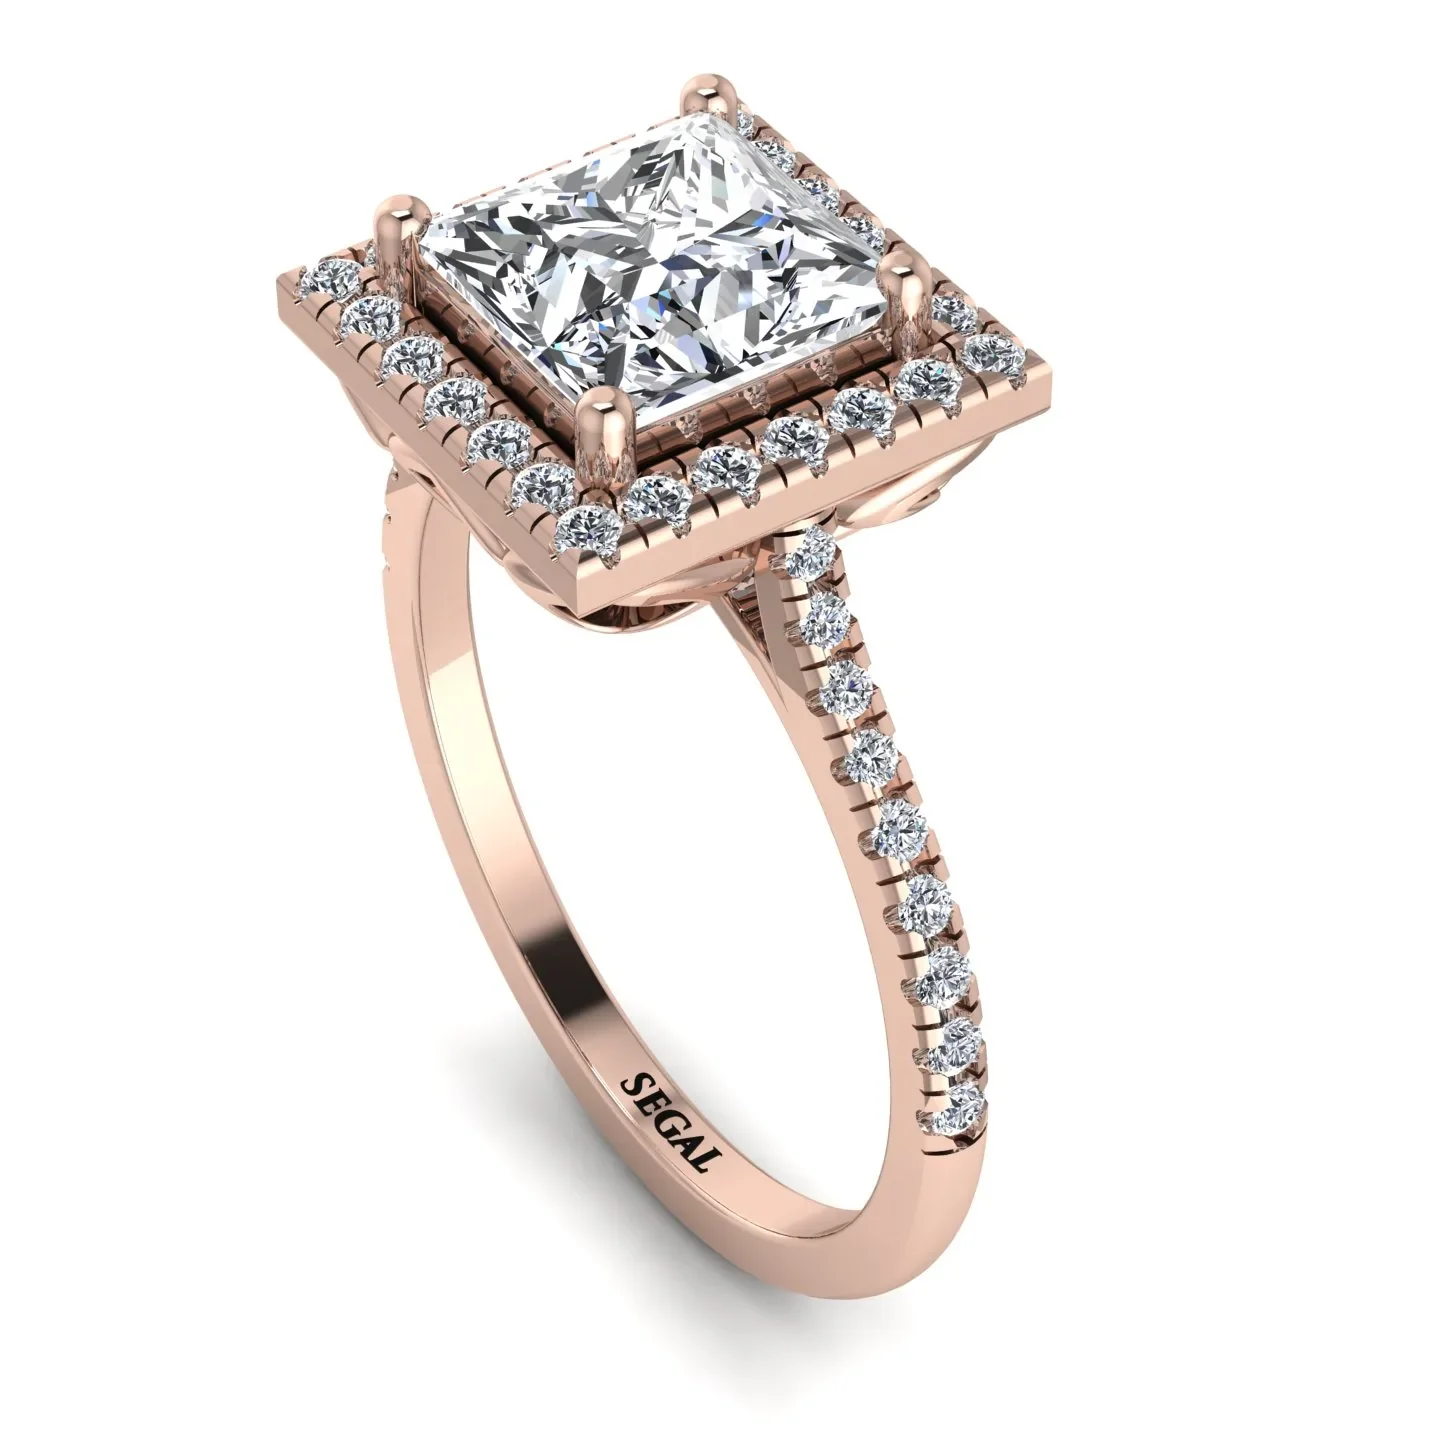 Image of Gorgeous Princess Cut Diamond Pave Engagement Ring With Hidden Stone - Margot No. 2